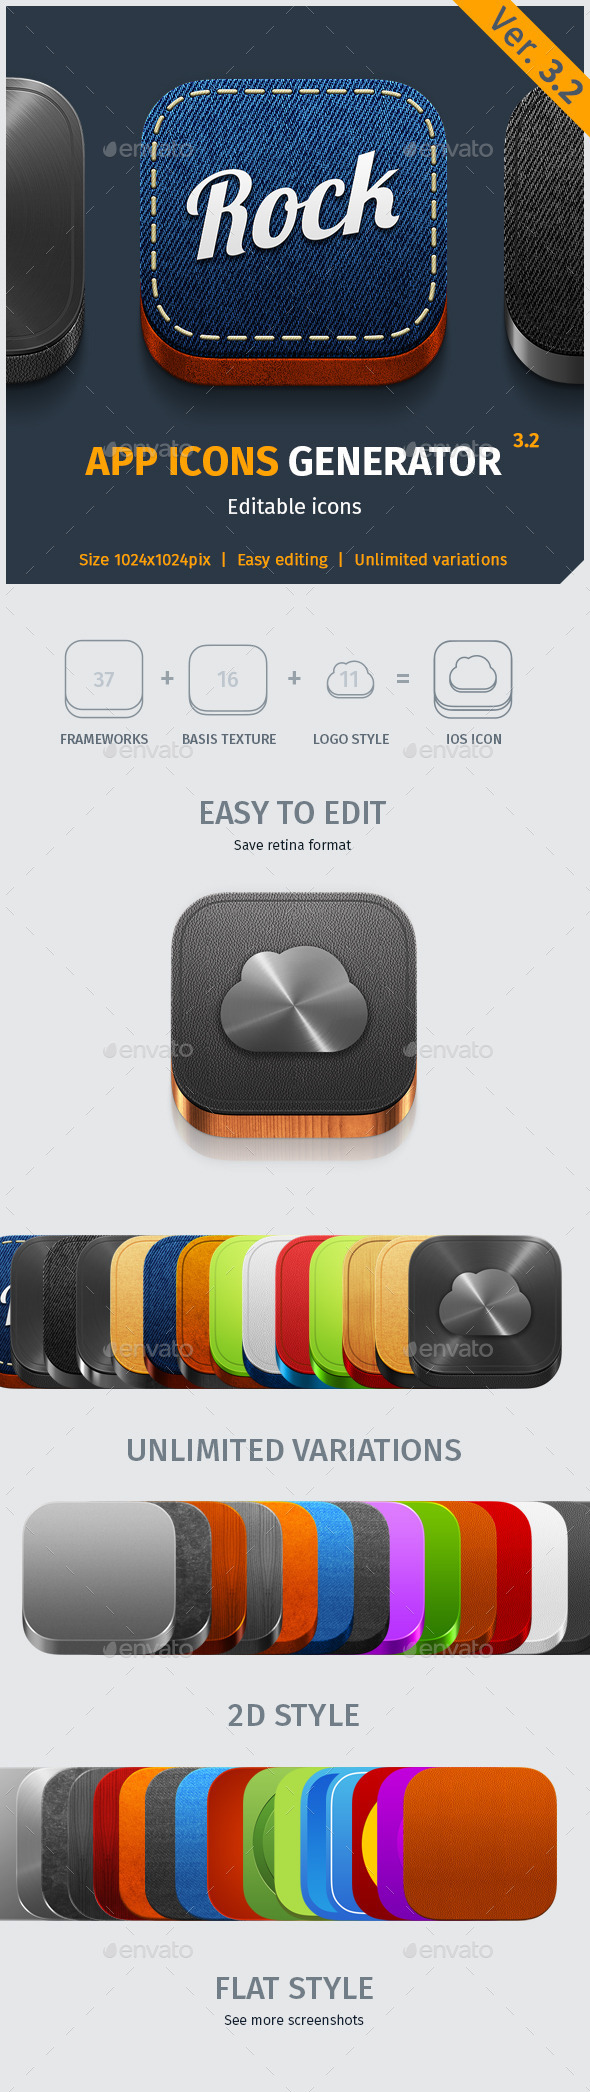 38 HQ Pictures App Icon Generator Round - 27 Software Icons Templates Ideas Best Icons Icon Icon Design